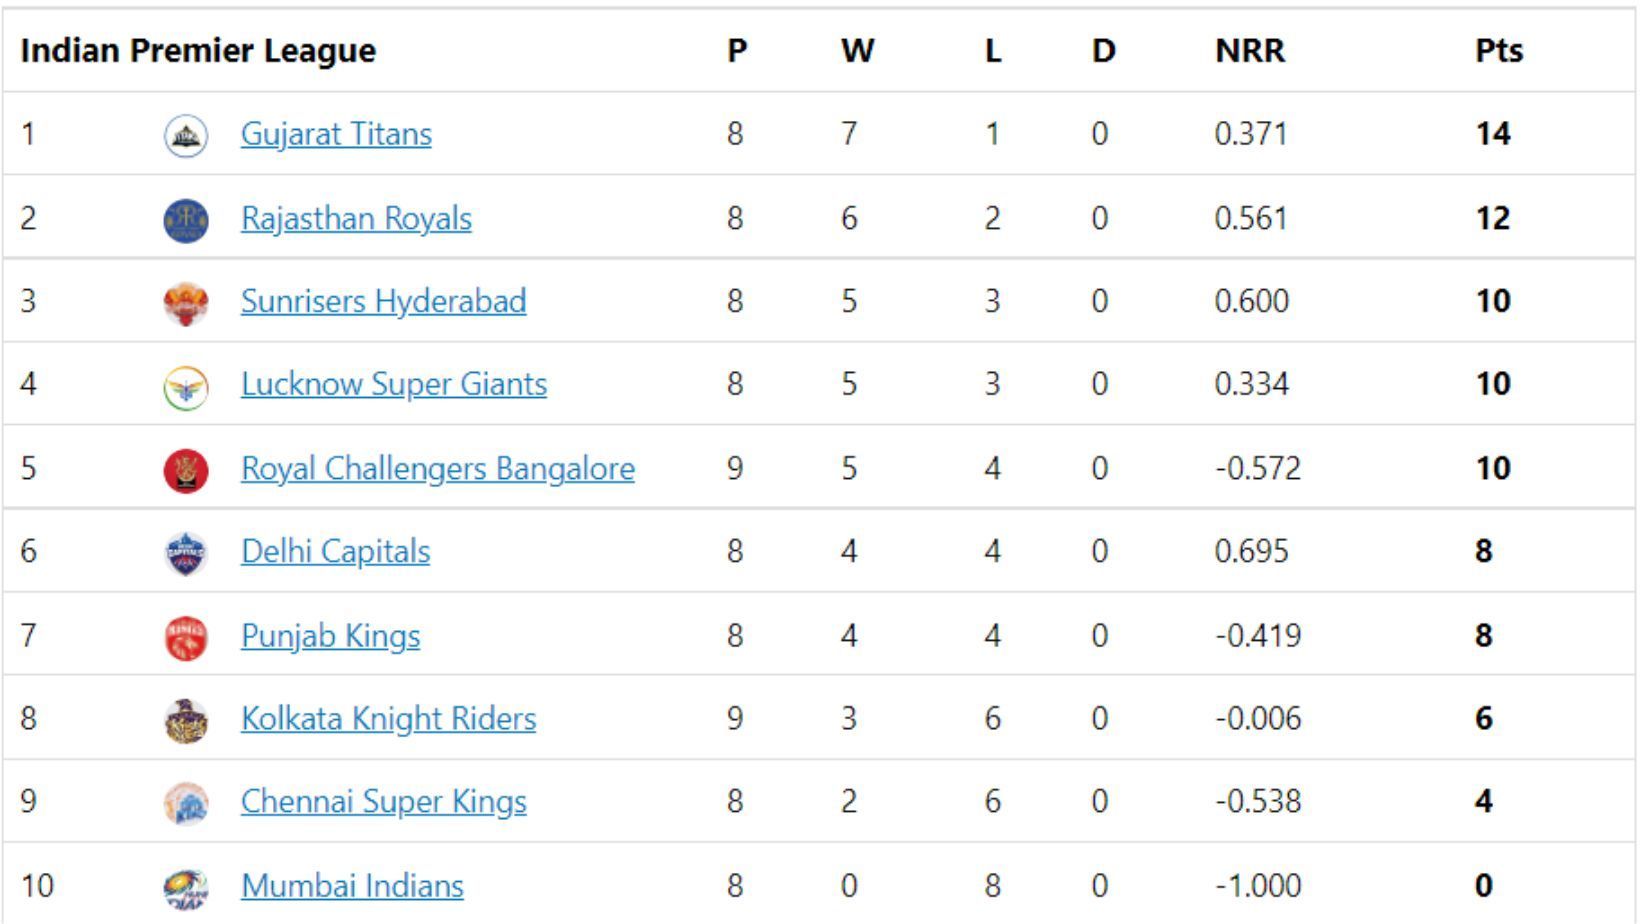 Delhi Capitals jump to No. 6 in the IPL 2022 Points Table.